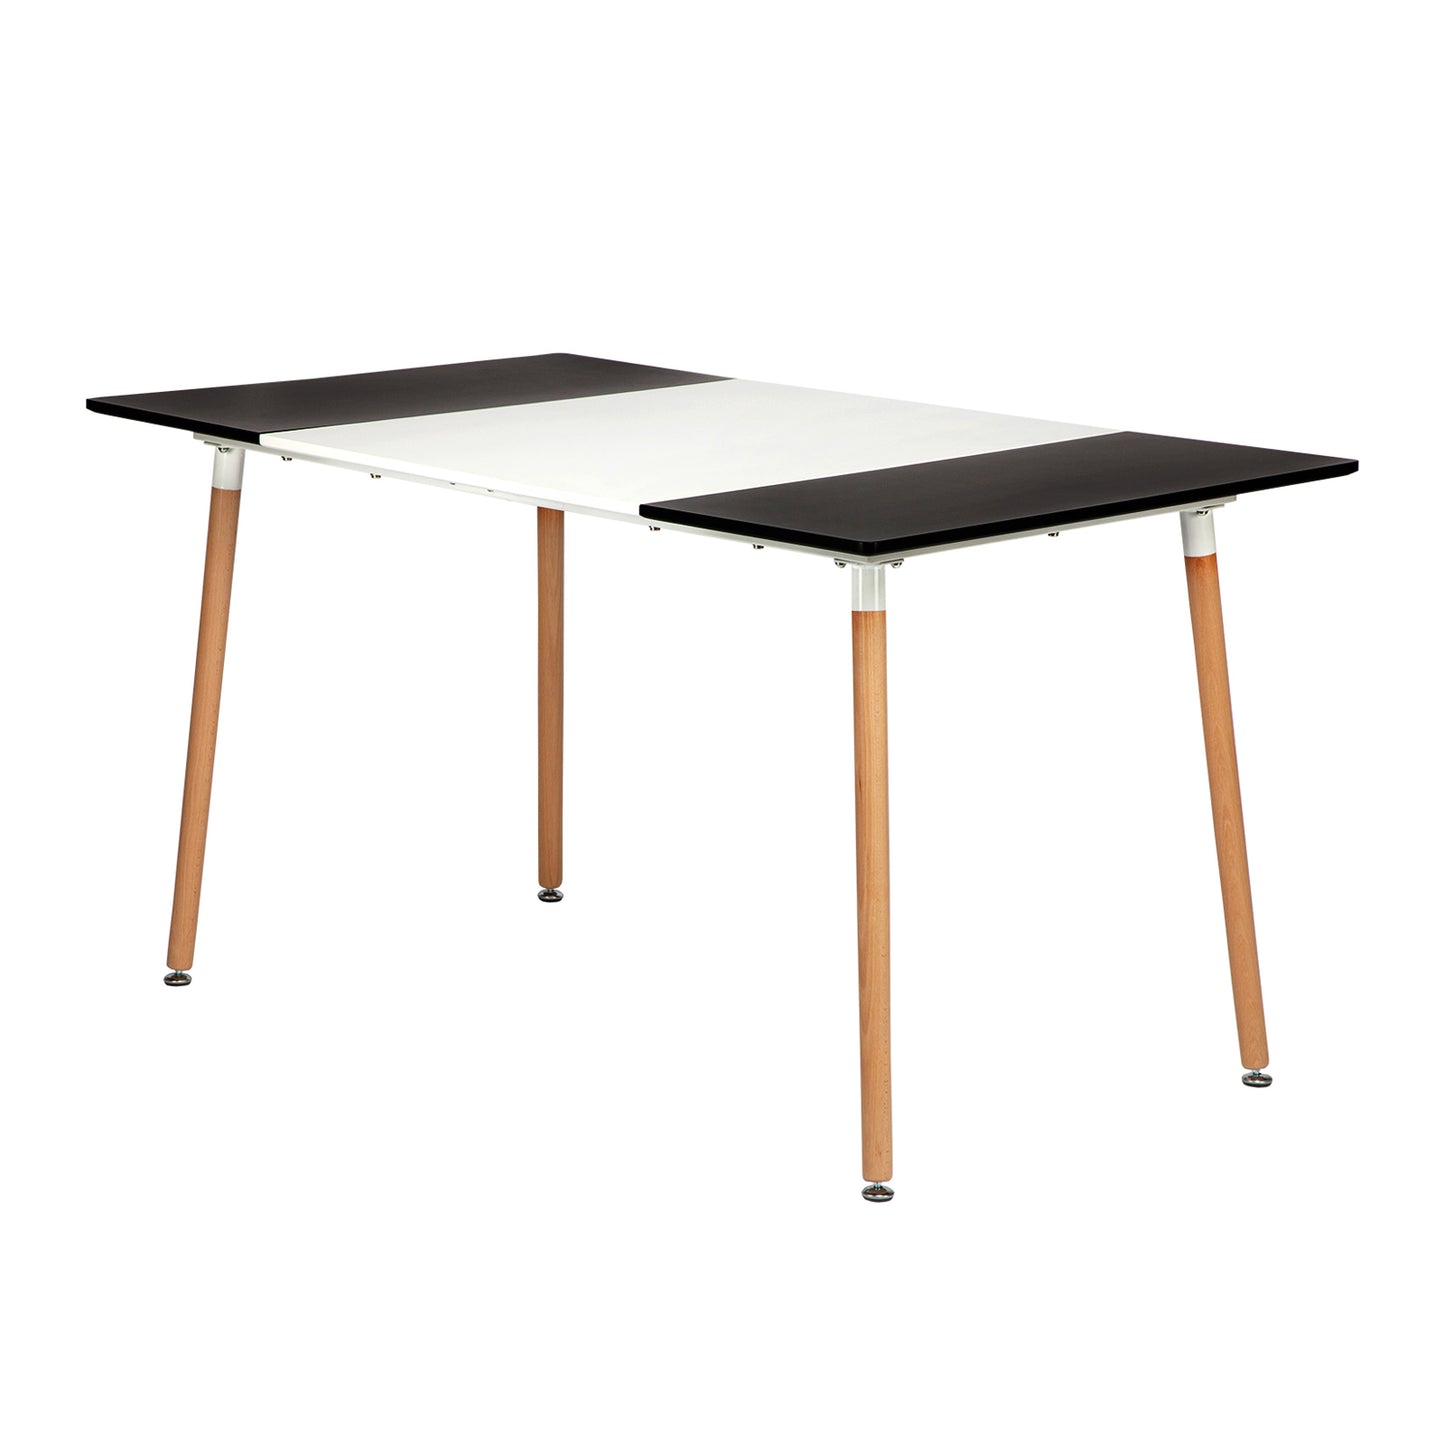 ROLL 160cm Splicing Dining Table With Beech Legs-Black White Black